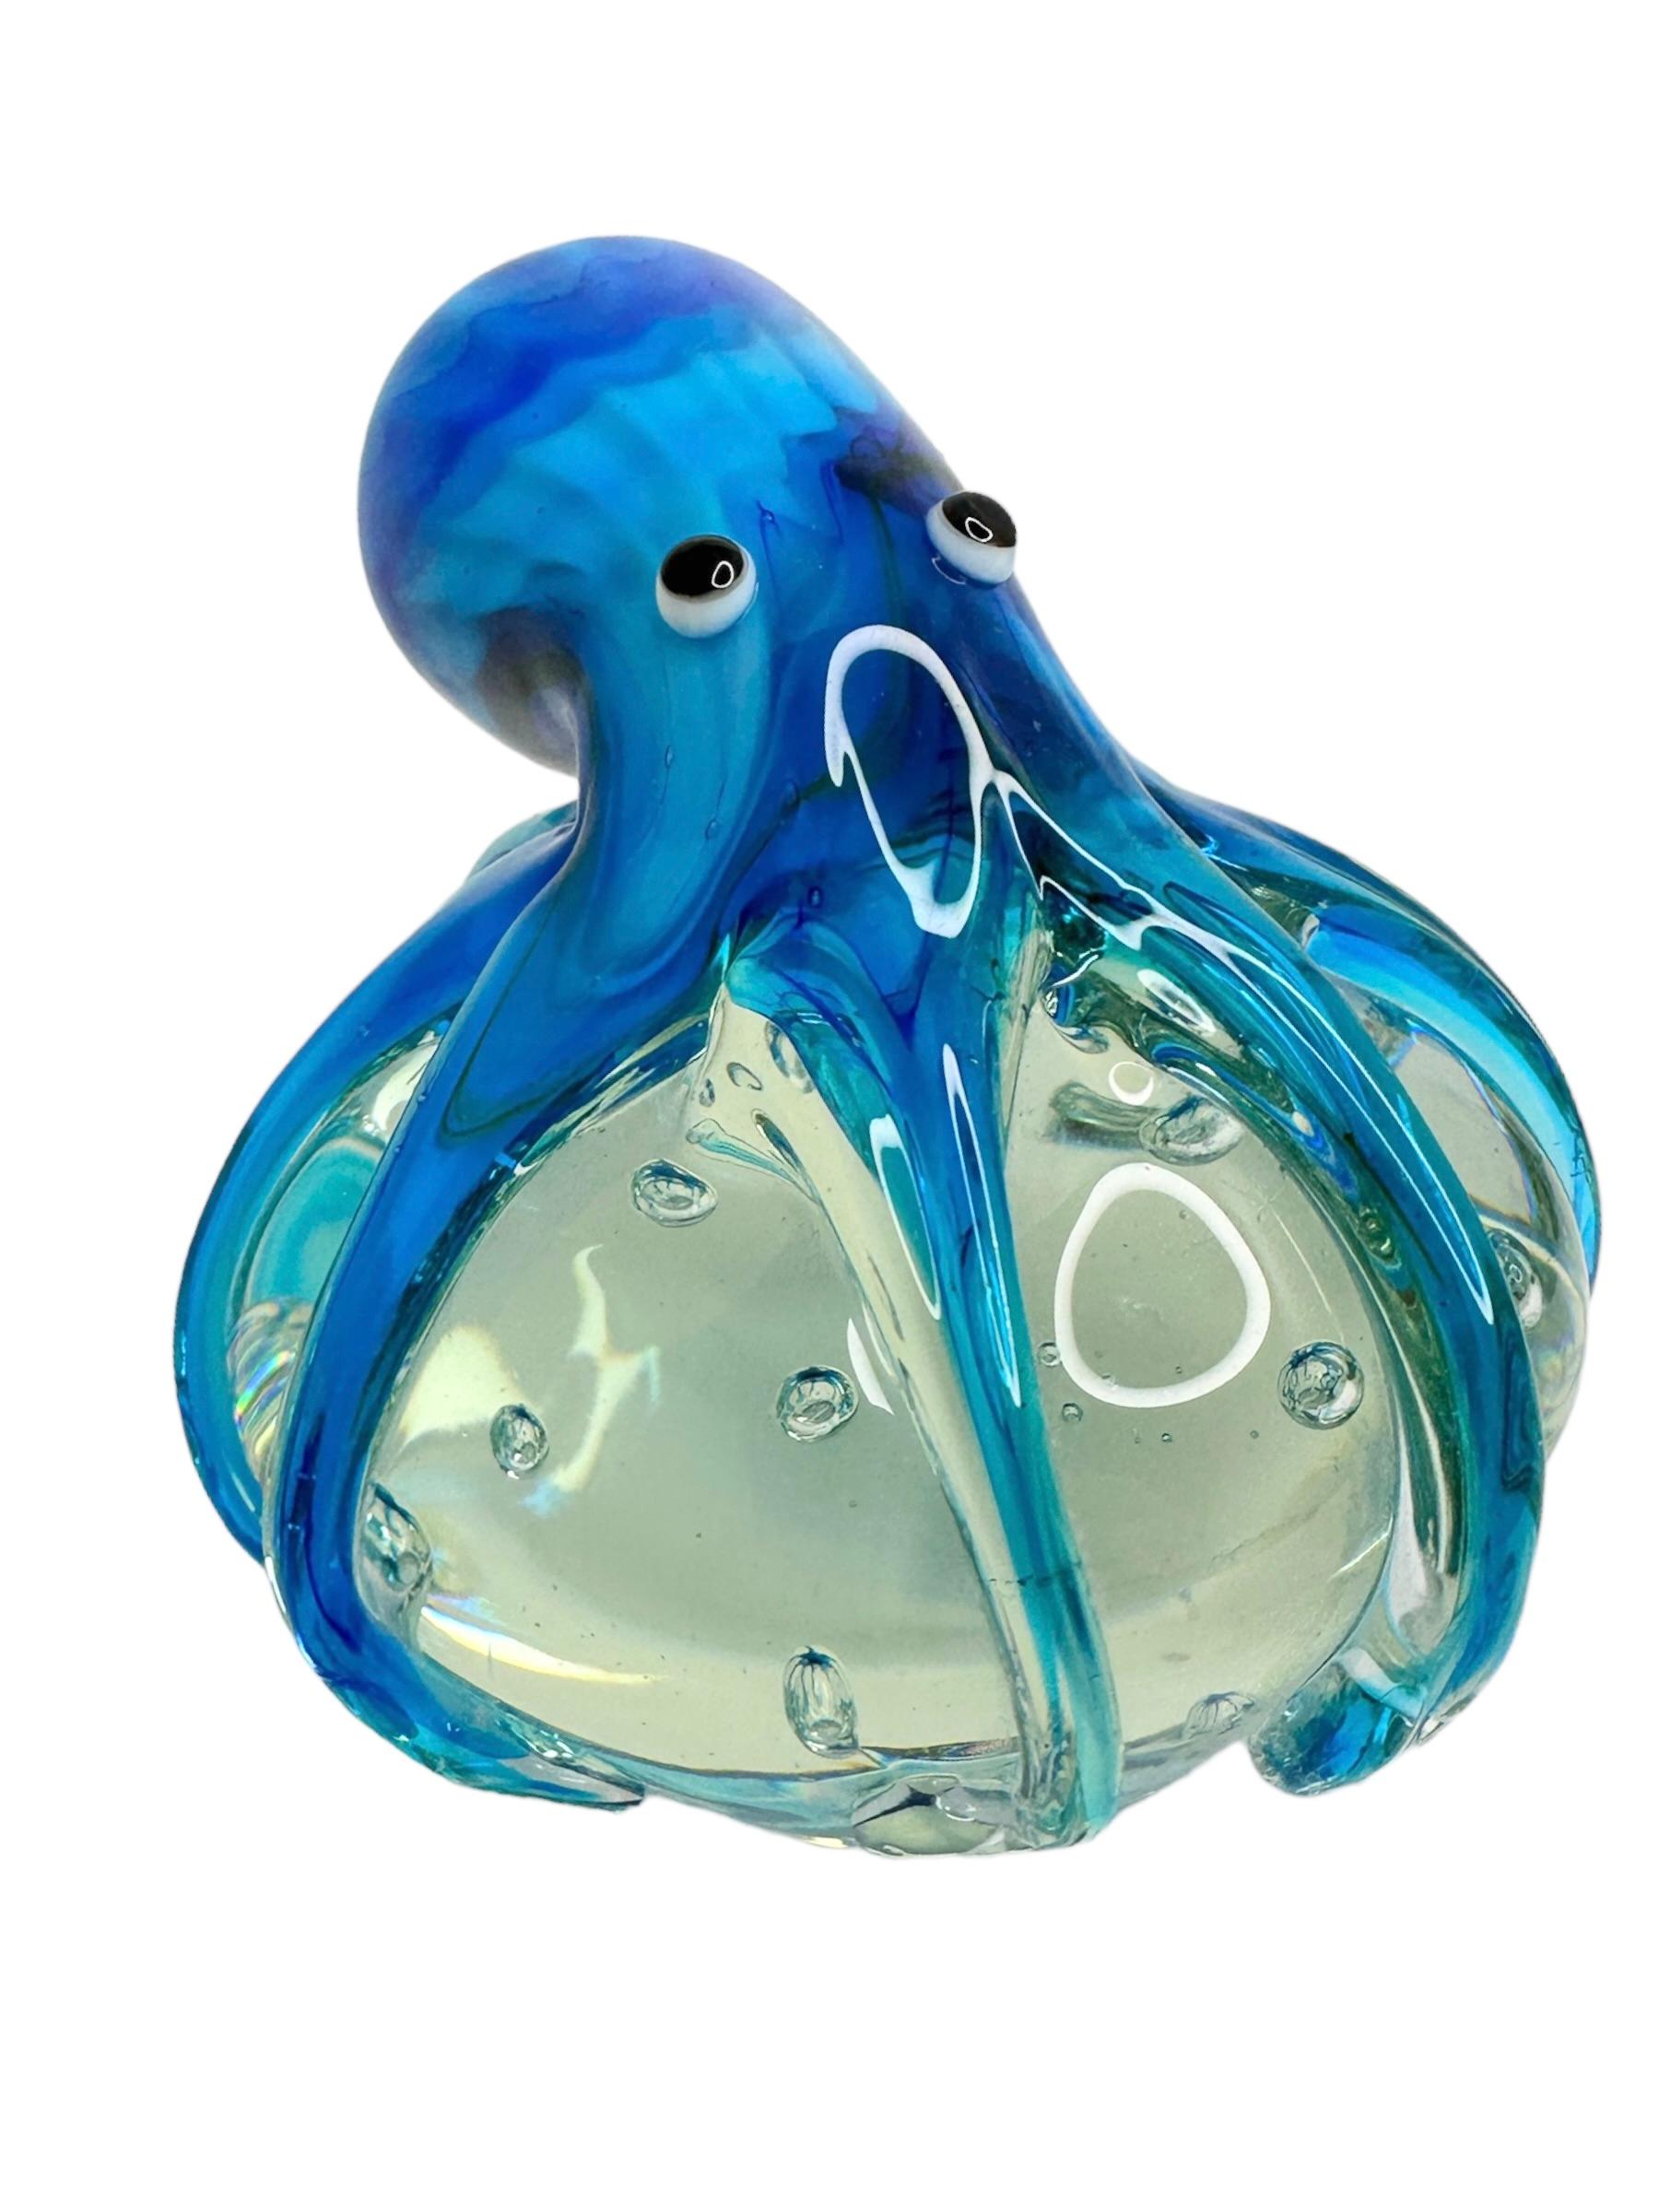 Beautiful Murano hand blown aquarium Italian art glass paper weight. Showing a giant octopus, on a glass bubble floating on controlled bubbles. Colors are different shades of blue, white, black and clear. A beautiful nice addition to your desktop or